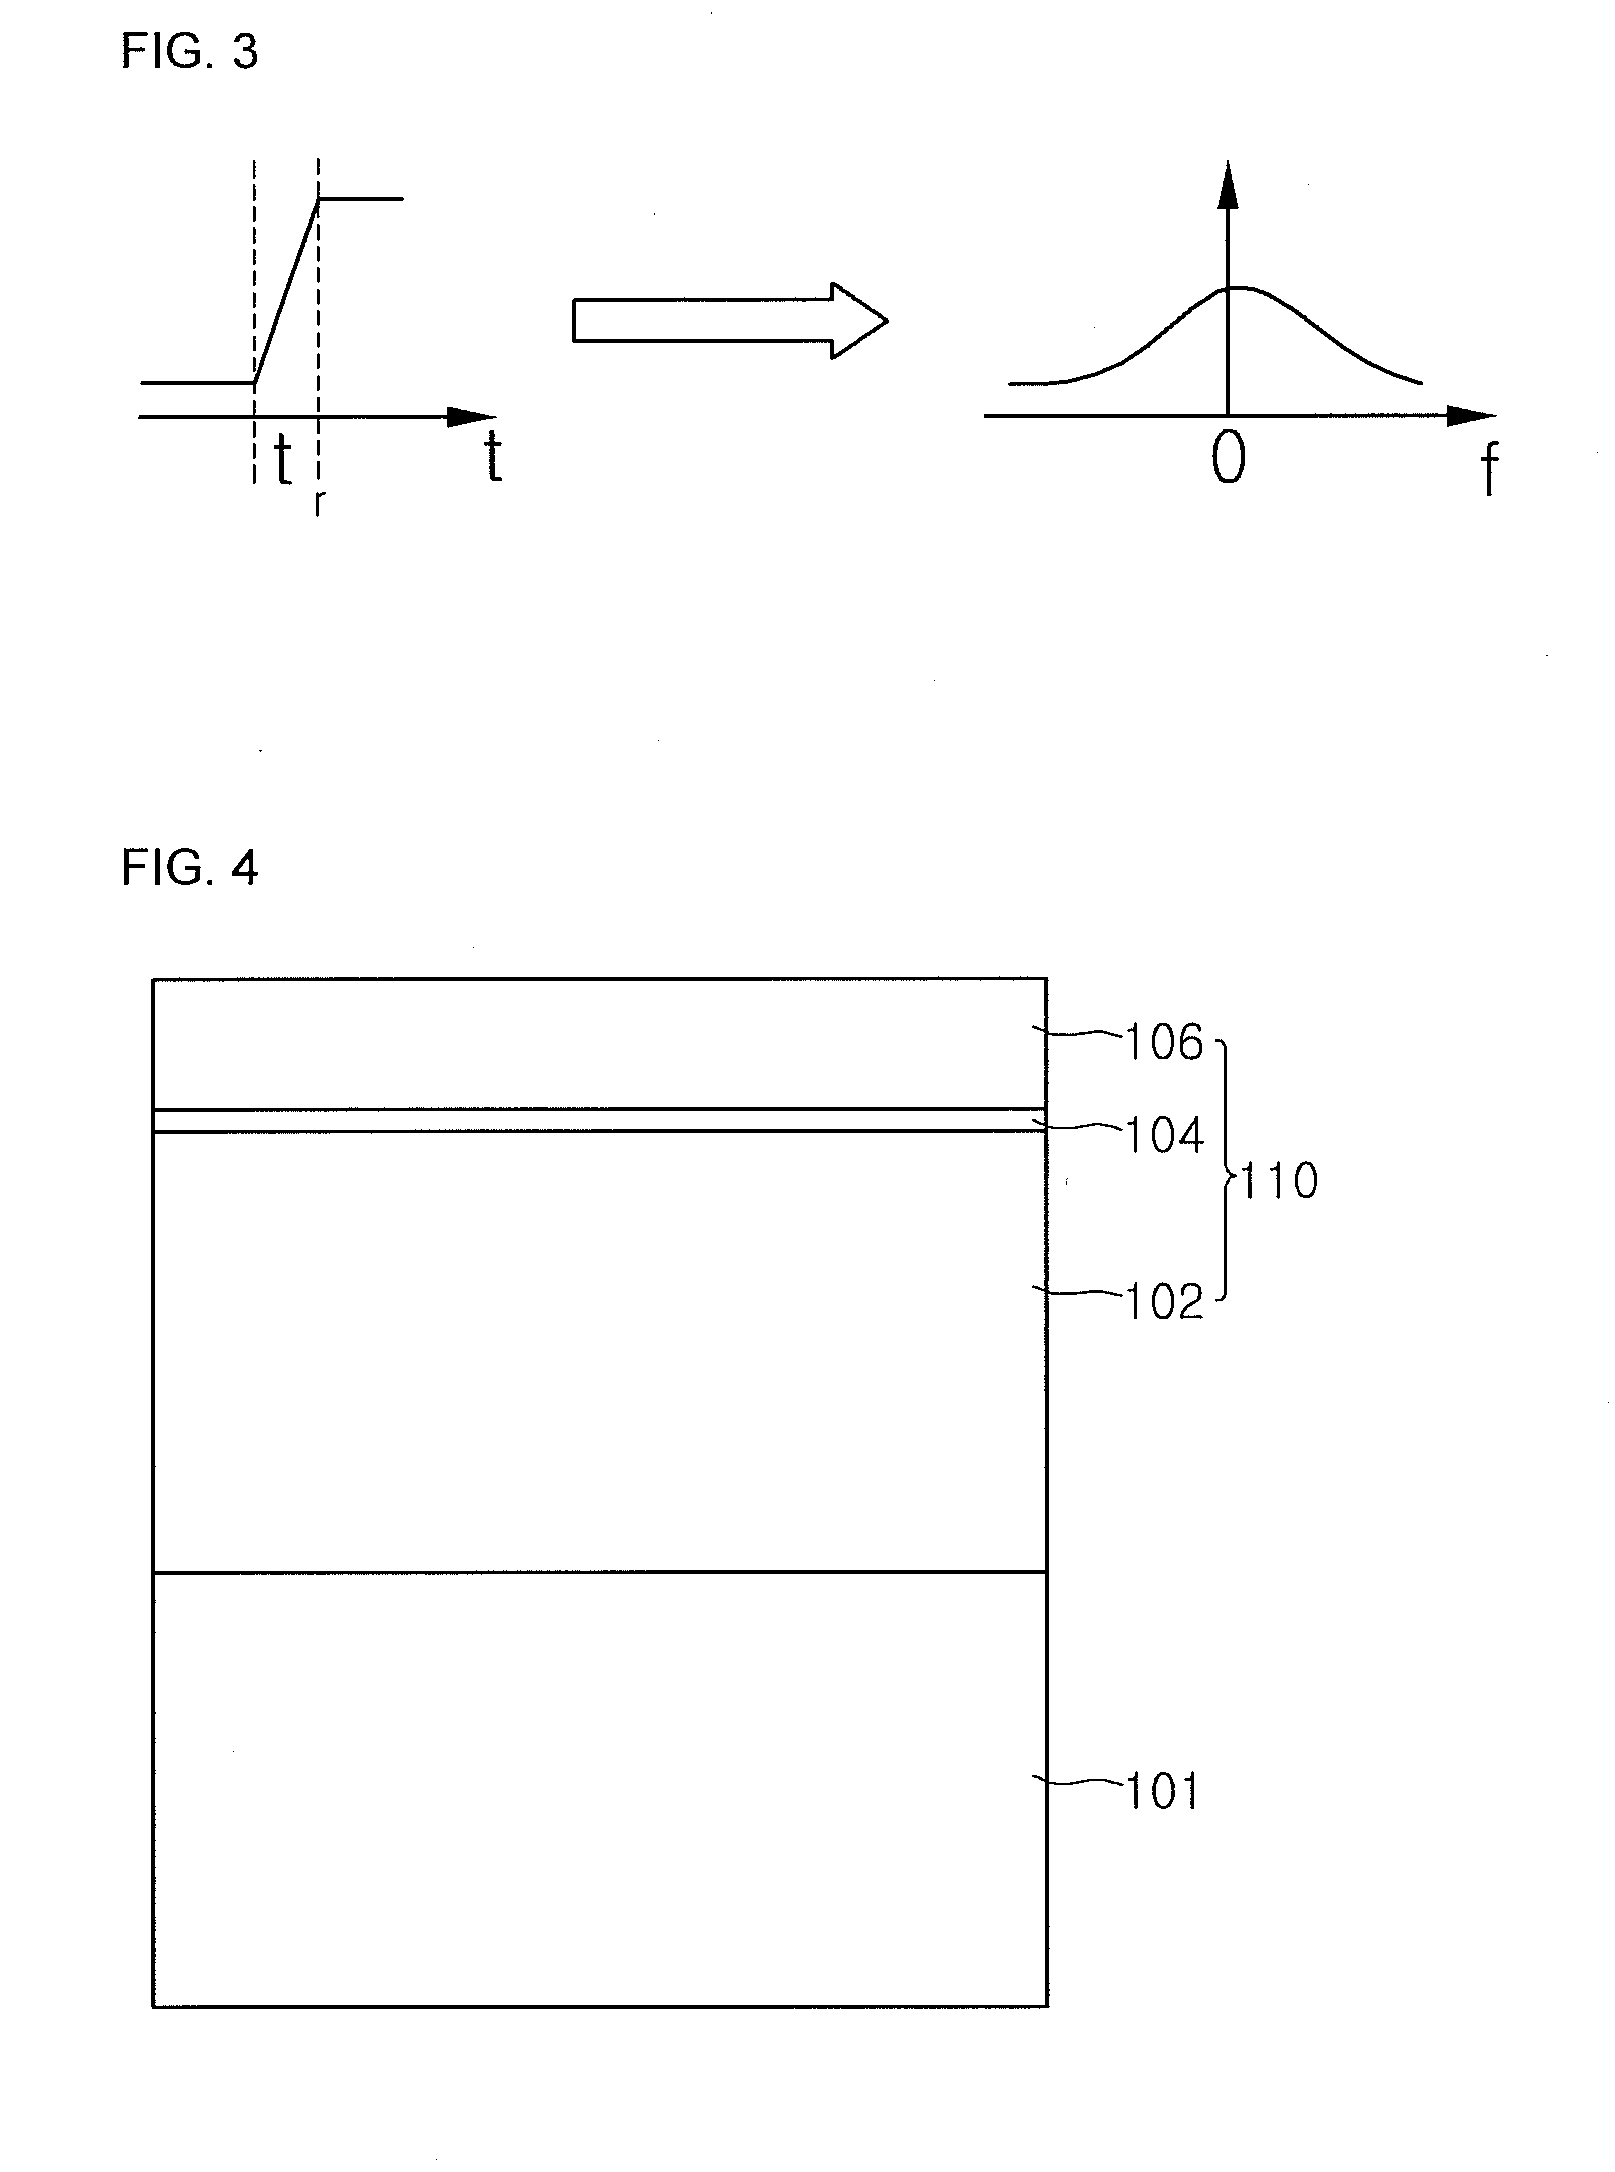 Light emitting device having a dielectric layer and a conductive layer in a cavity